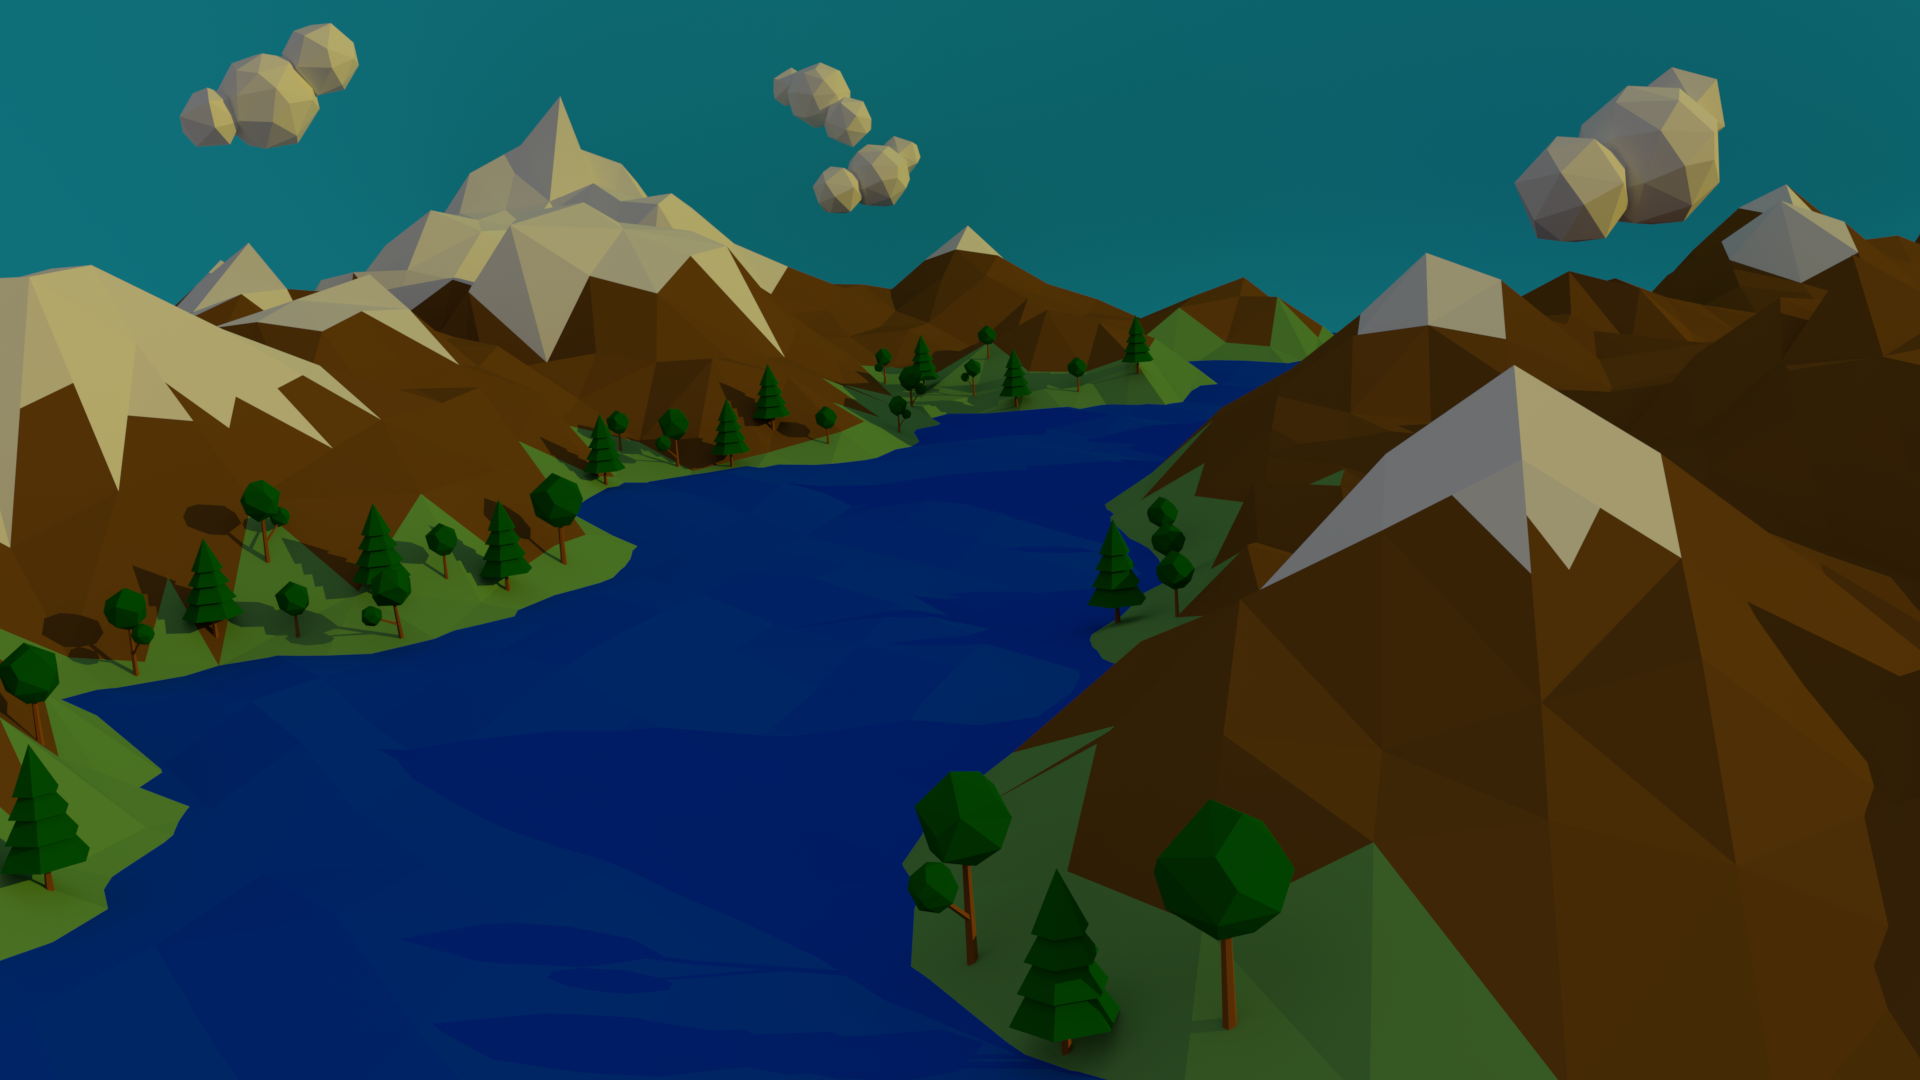 General 1920x1080 water mountains nature low poly river trees snow digital art